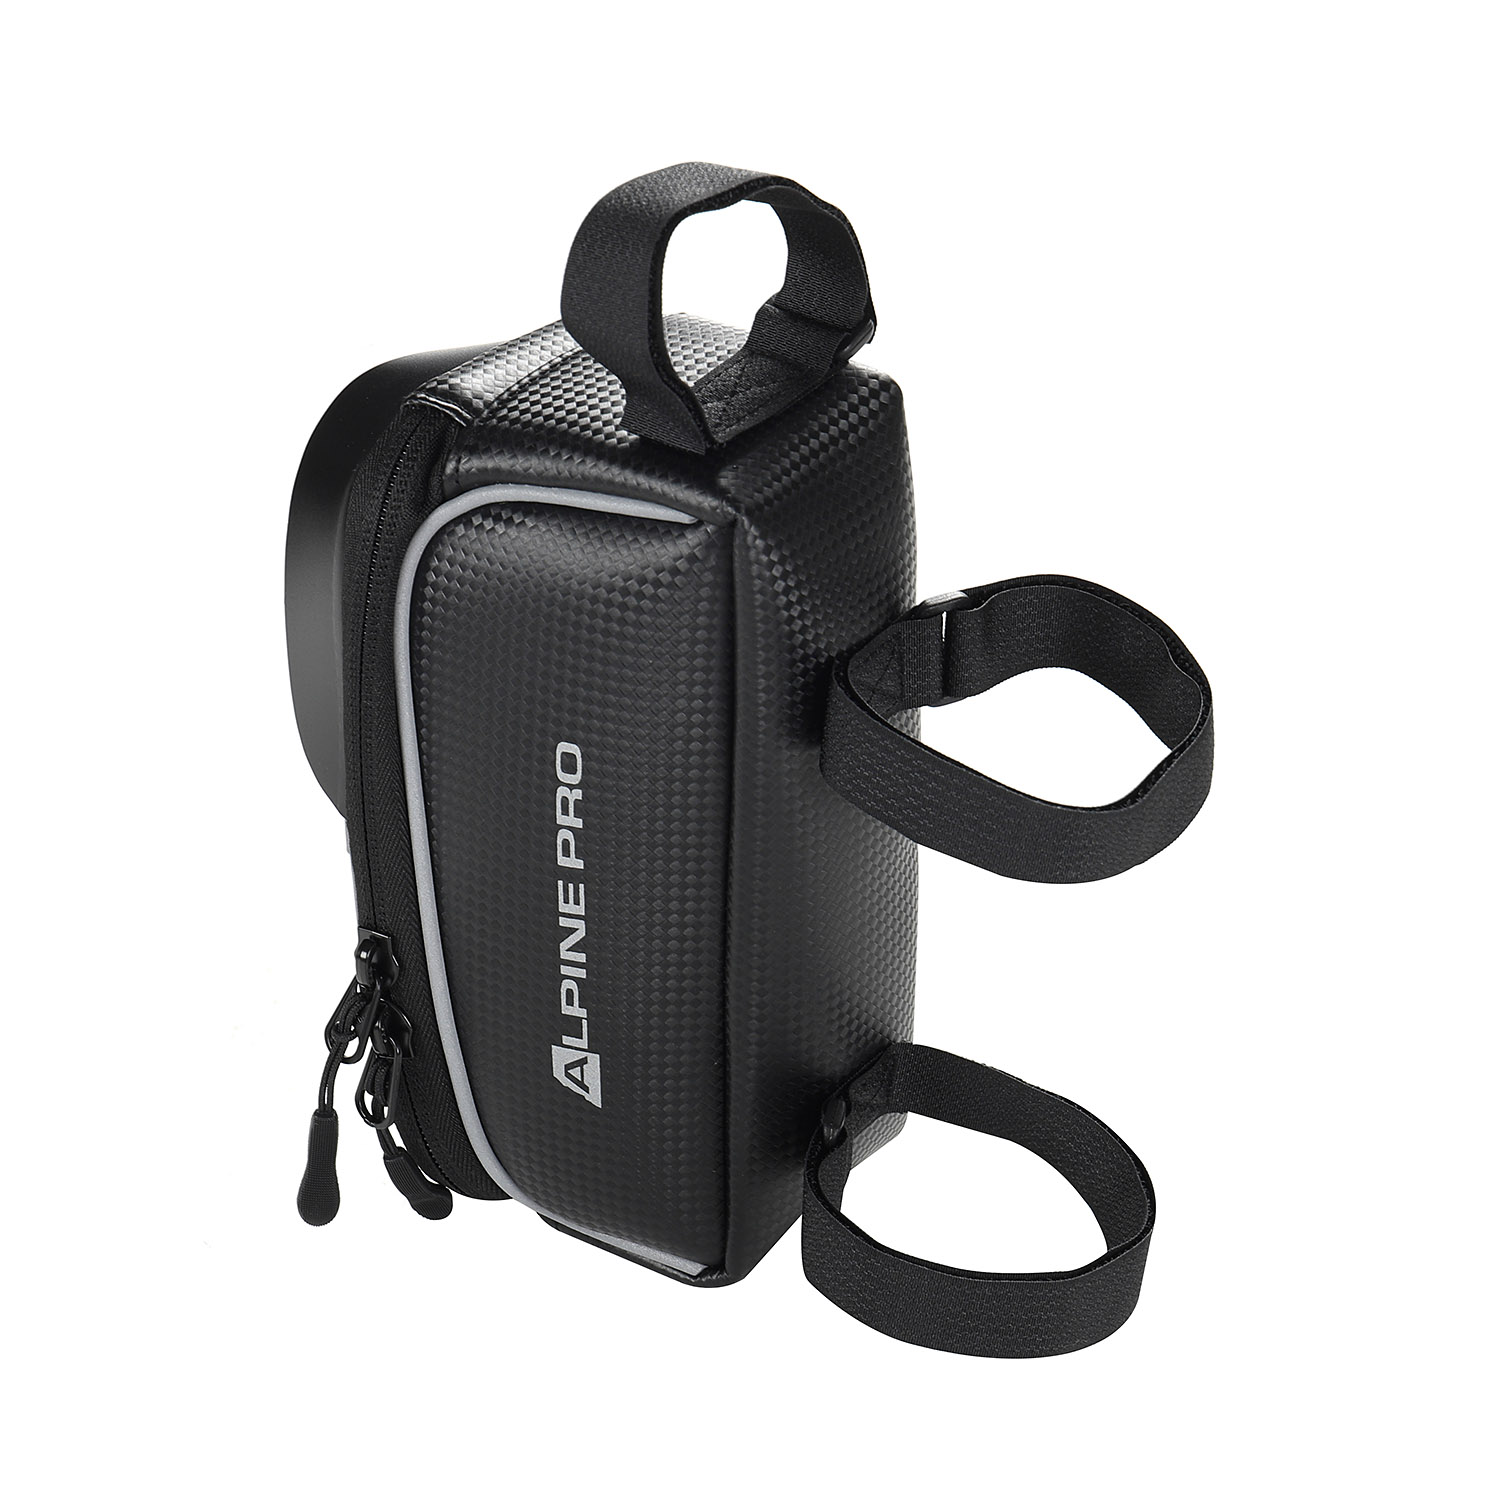 Cycling bag for mobile phone ALPINE PRO POLRE black